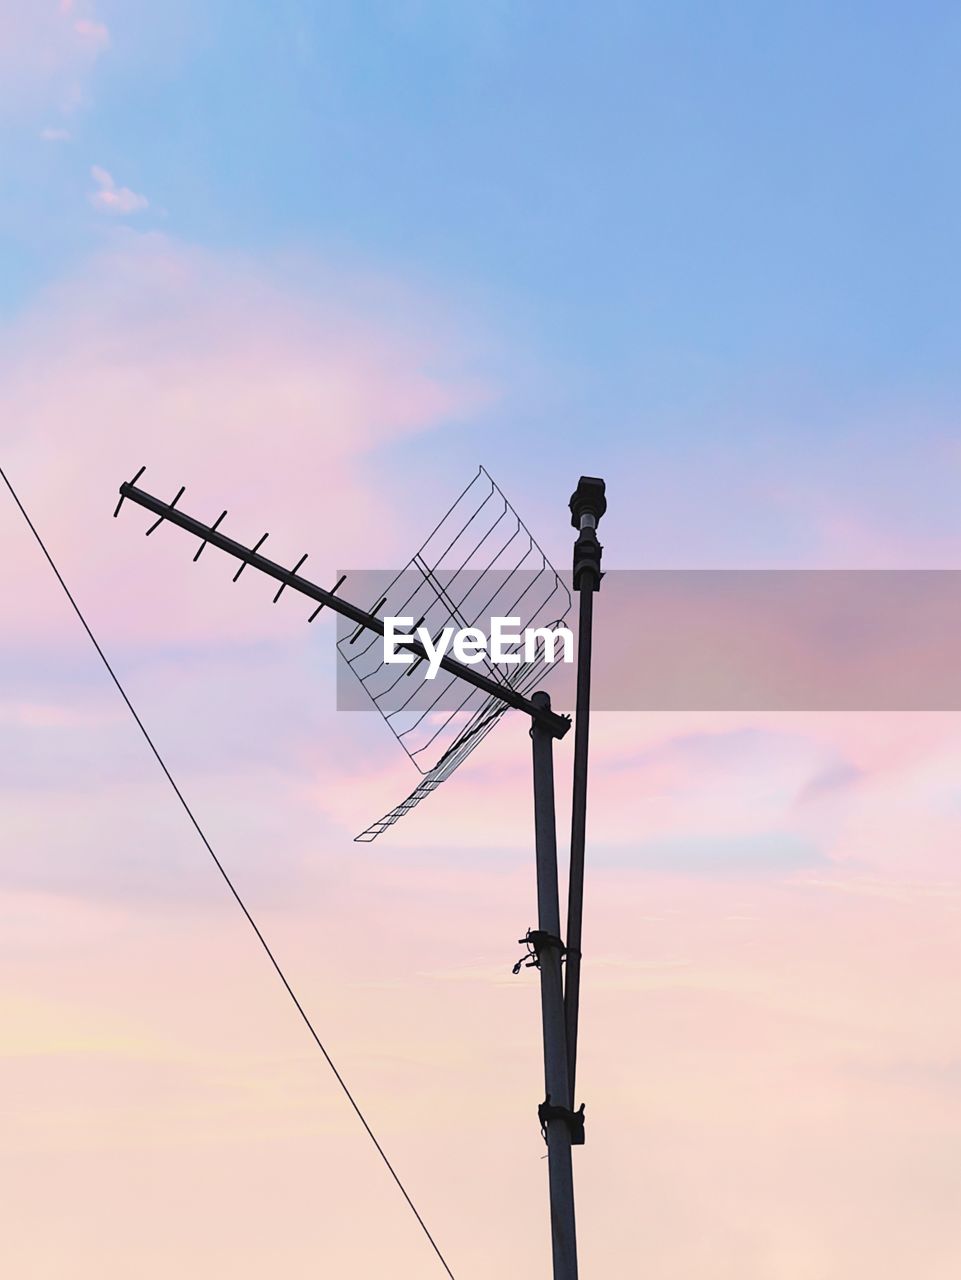 Low angle view of silhouette telephone pole against sky during sunset